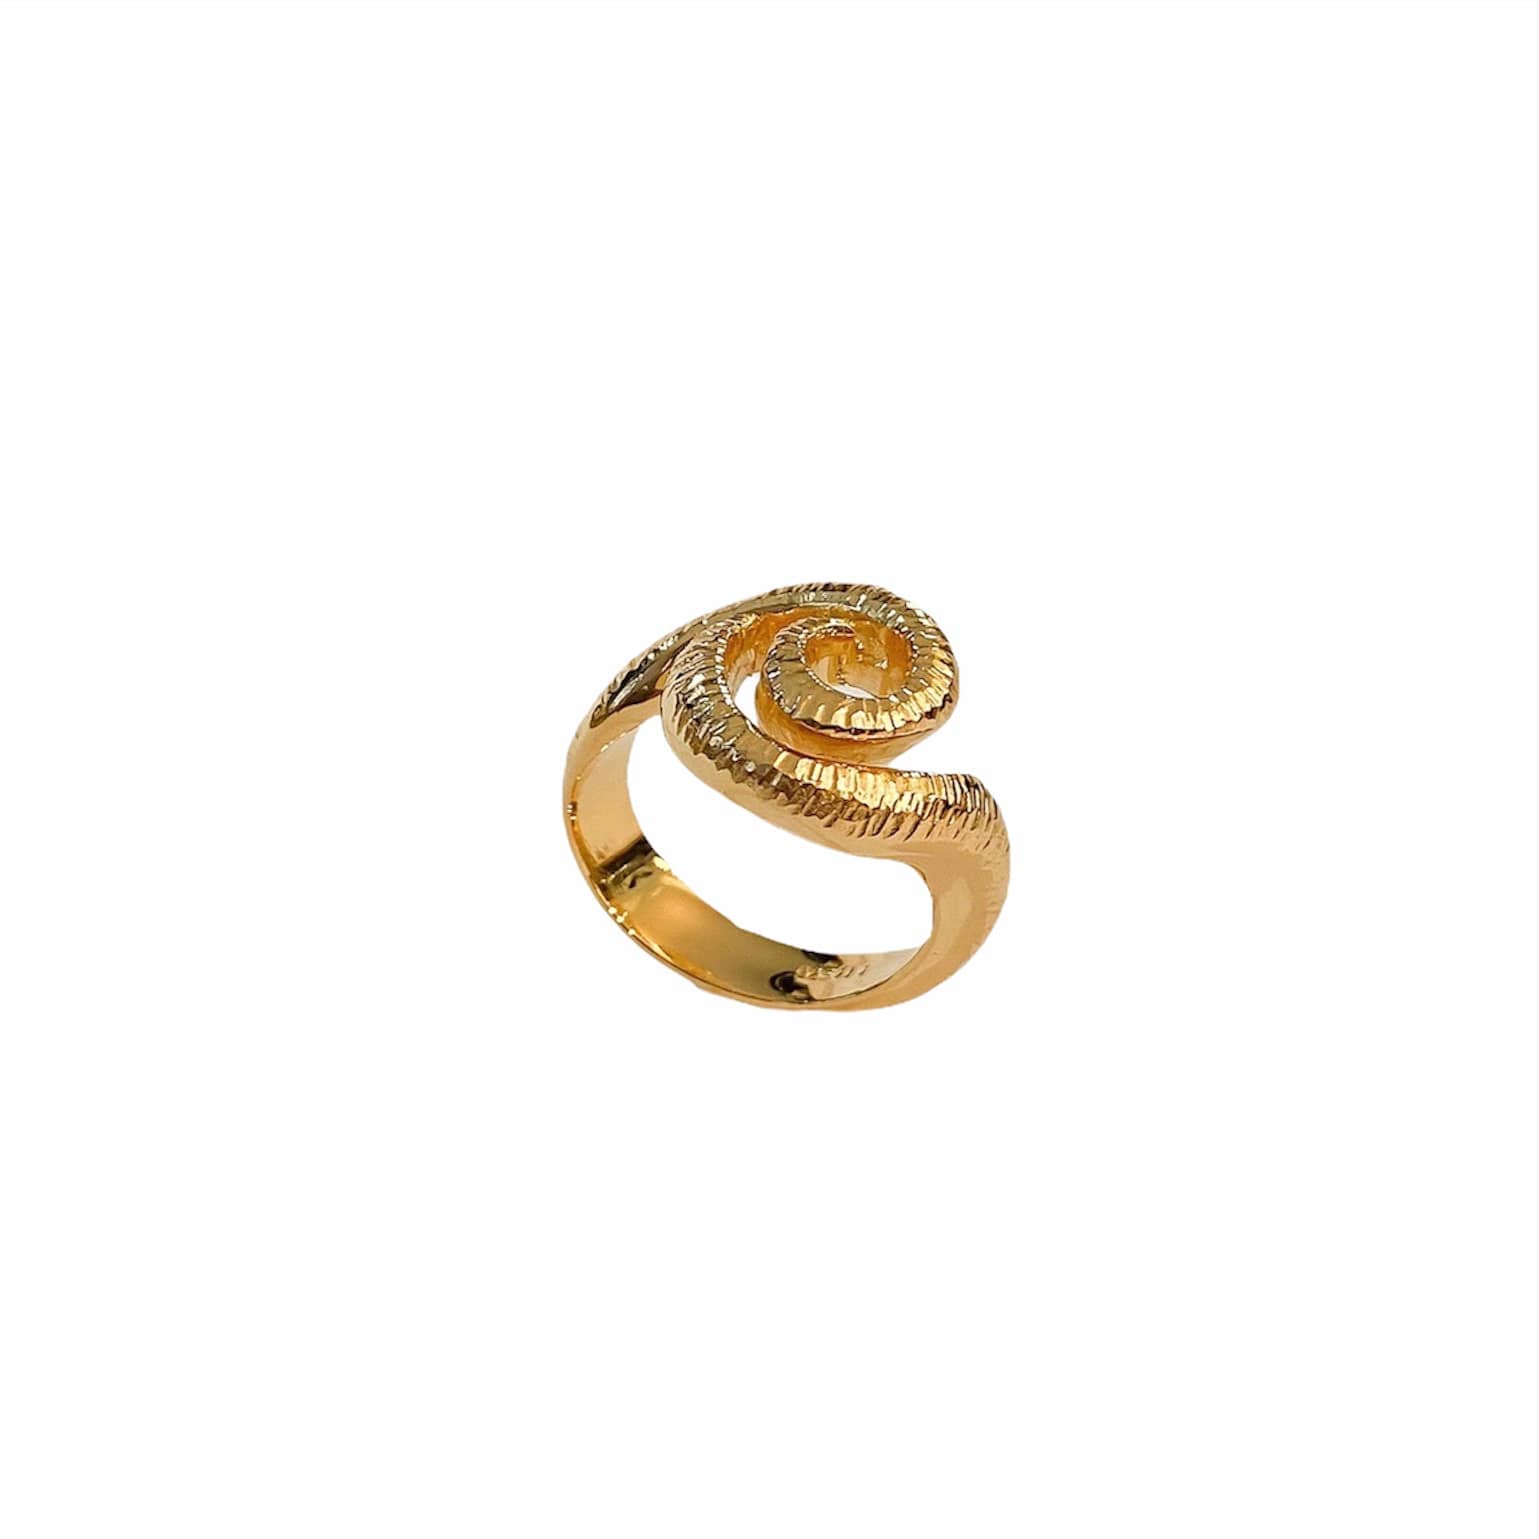 Surrea Raw gold plated silver ring, top view.